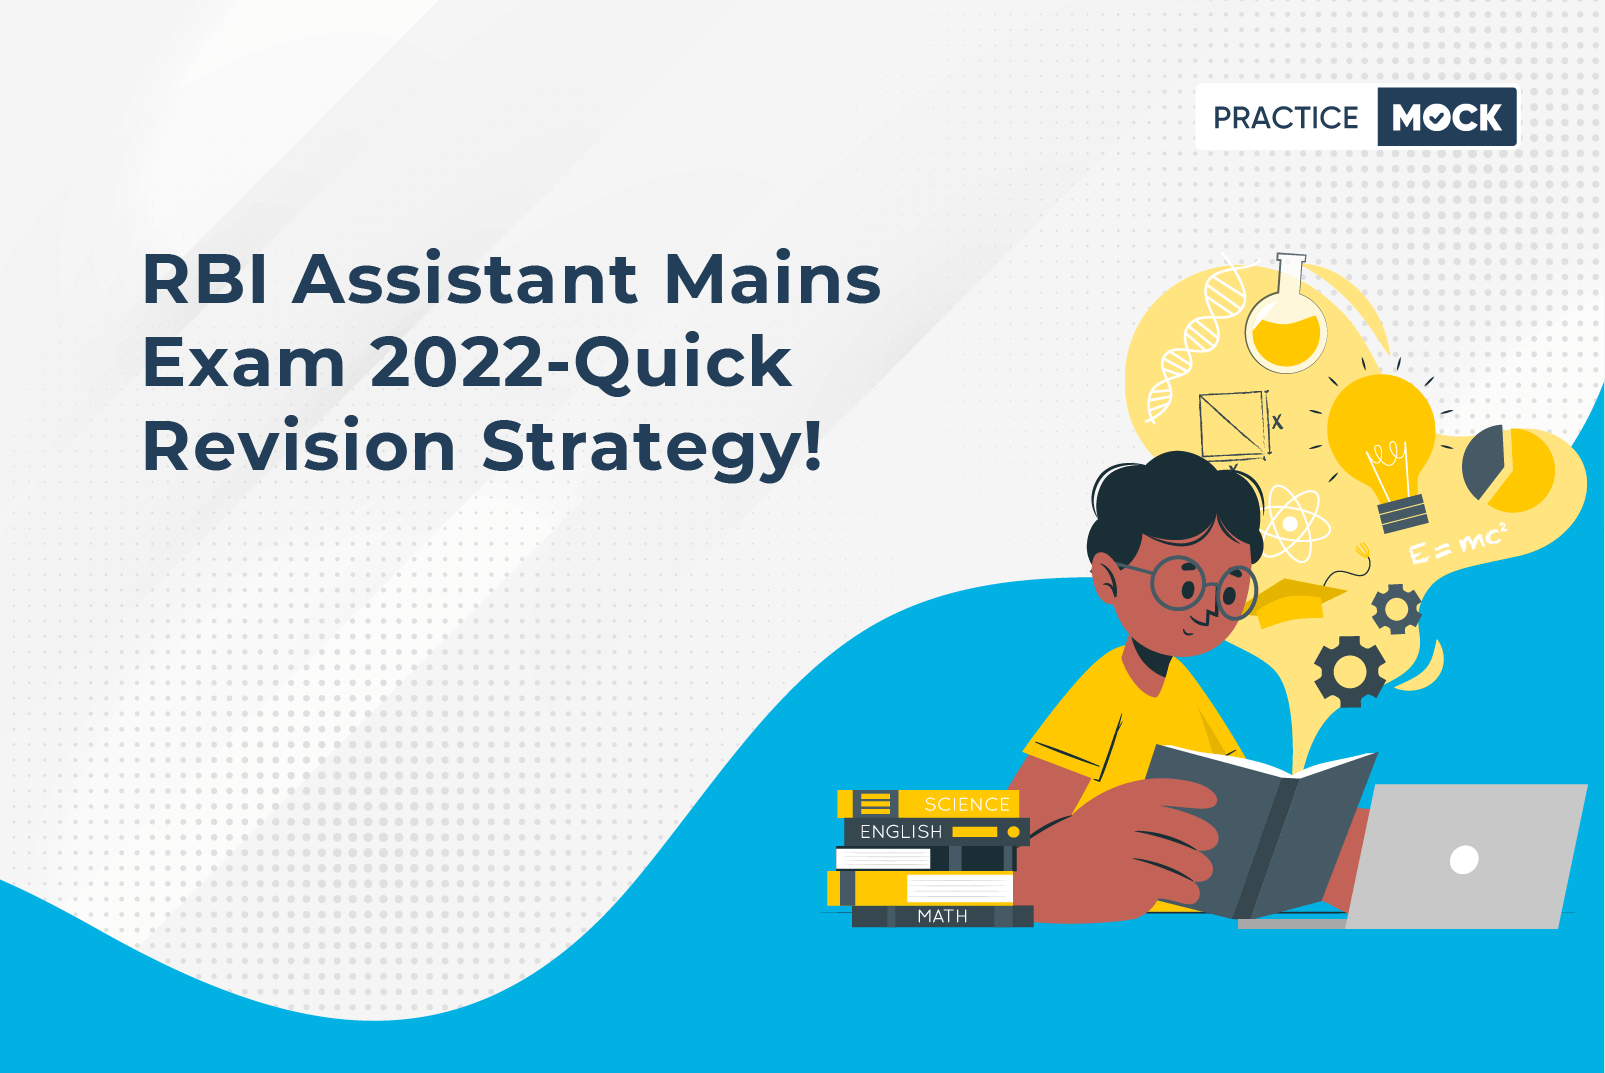 RBI Assistant Mains Exam 2022-Last Minute Tips